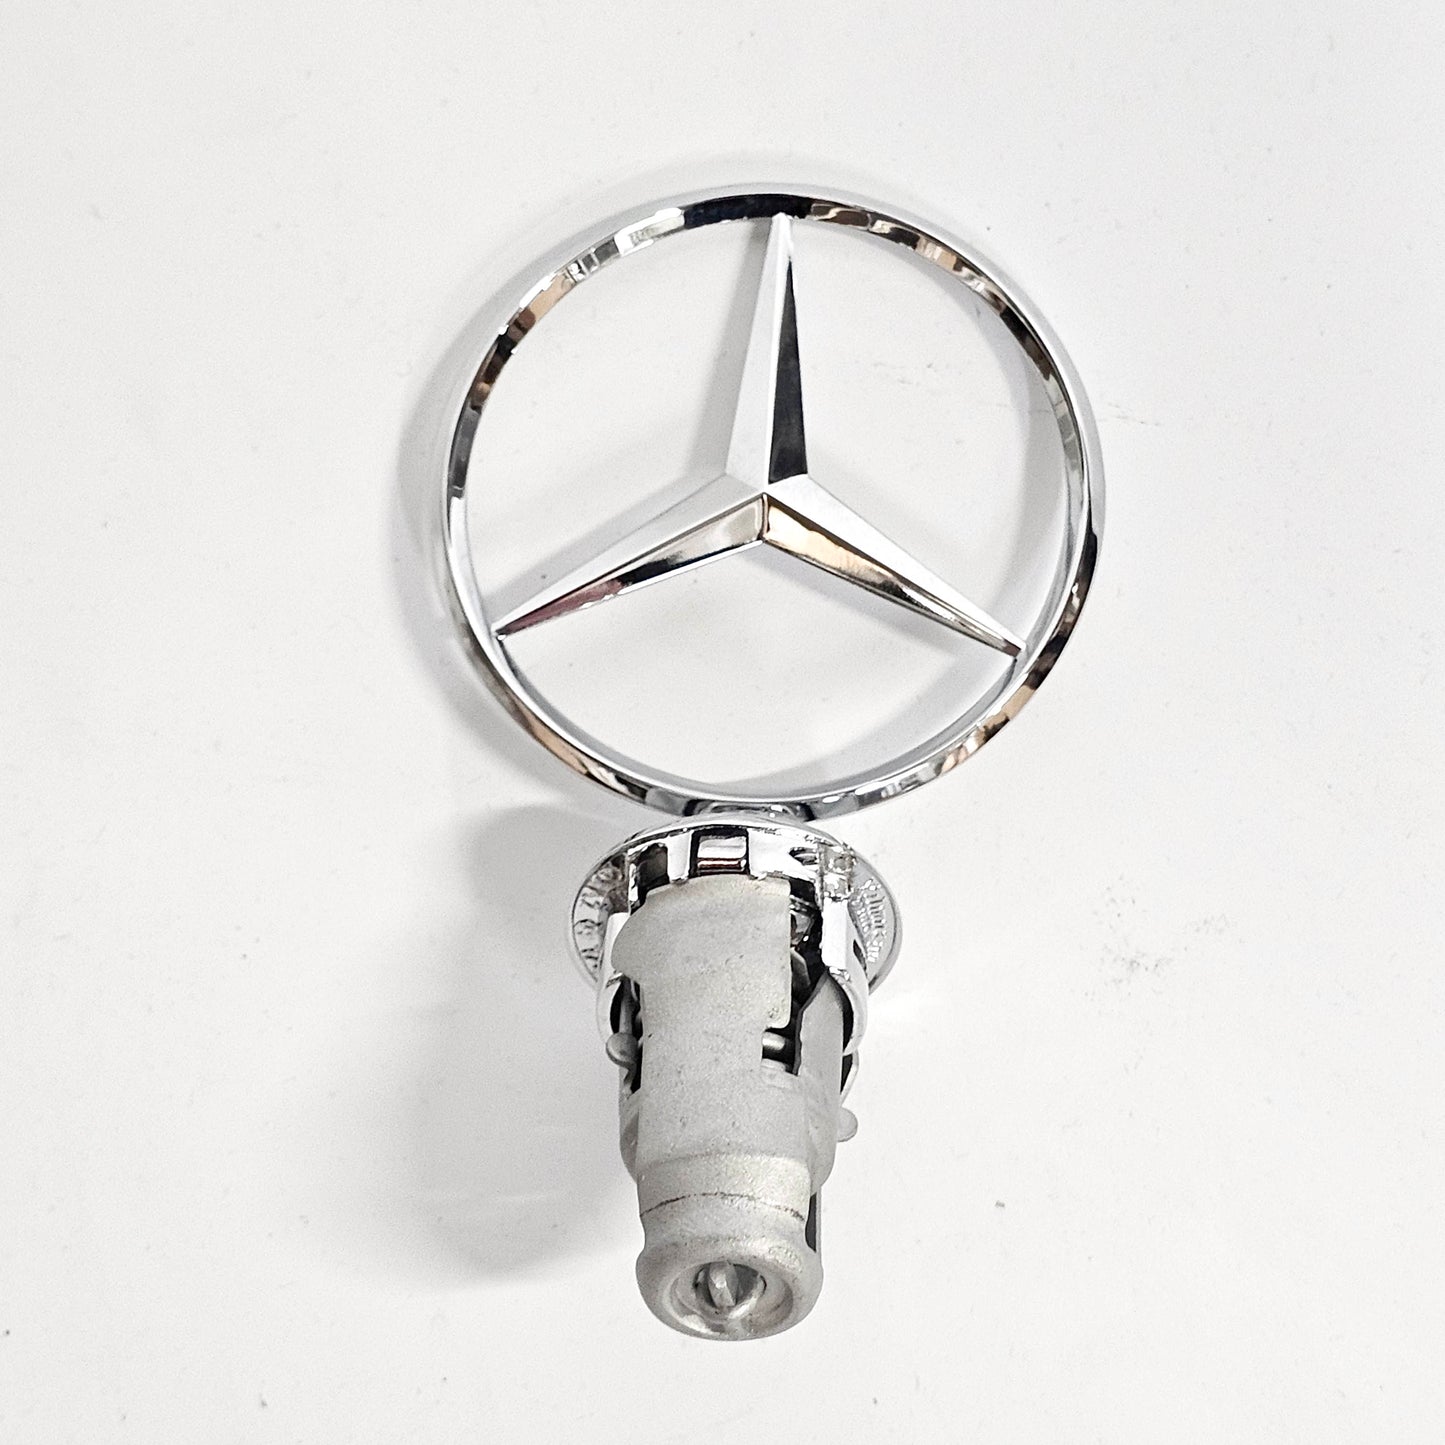 Mercedes W126 grille logo badge and raised star